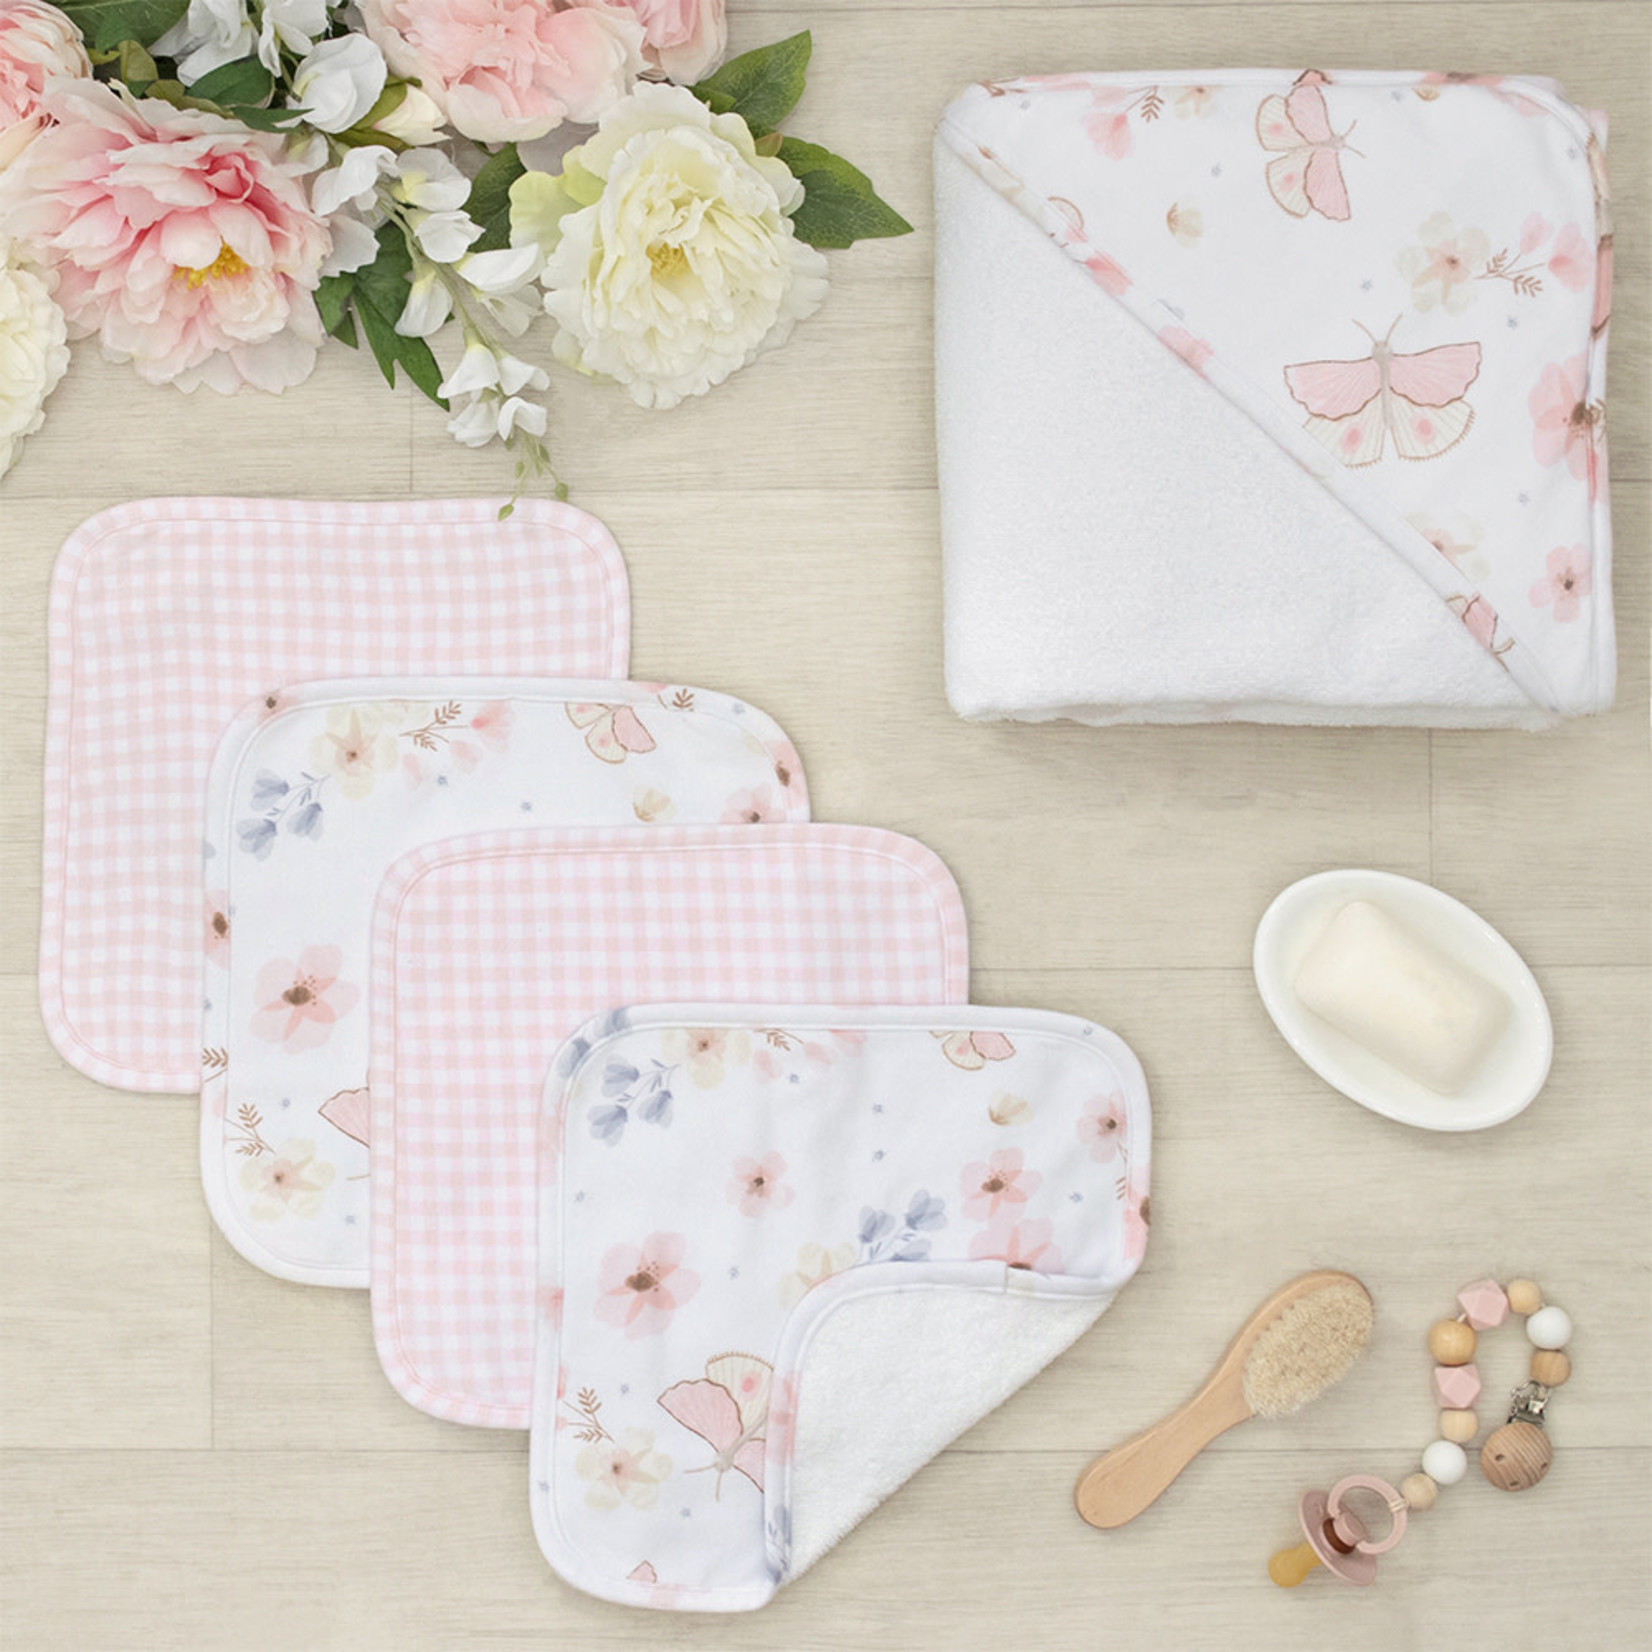 Living Textiles 5pc Bath Gift Set-Butterfly